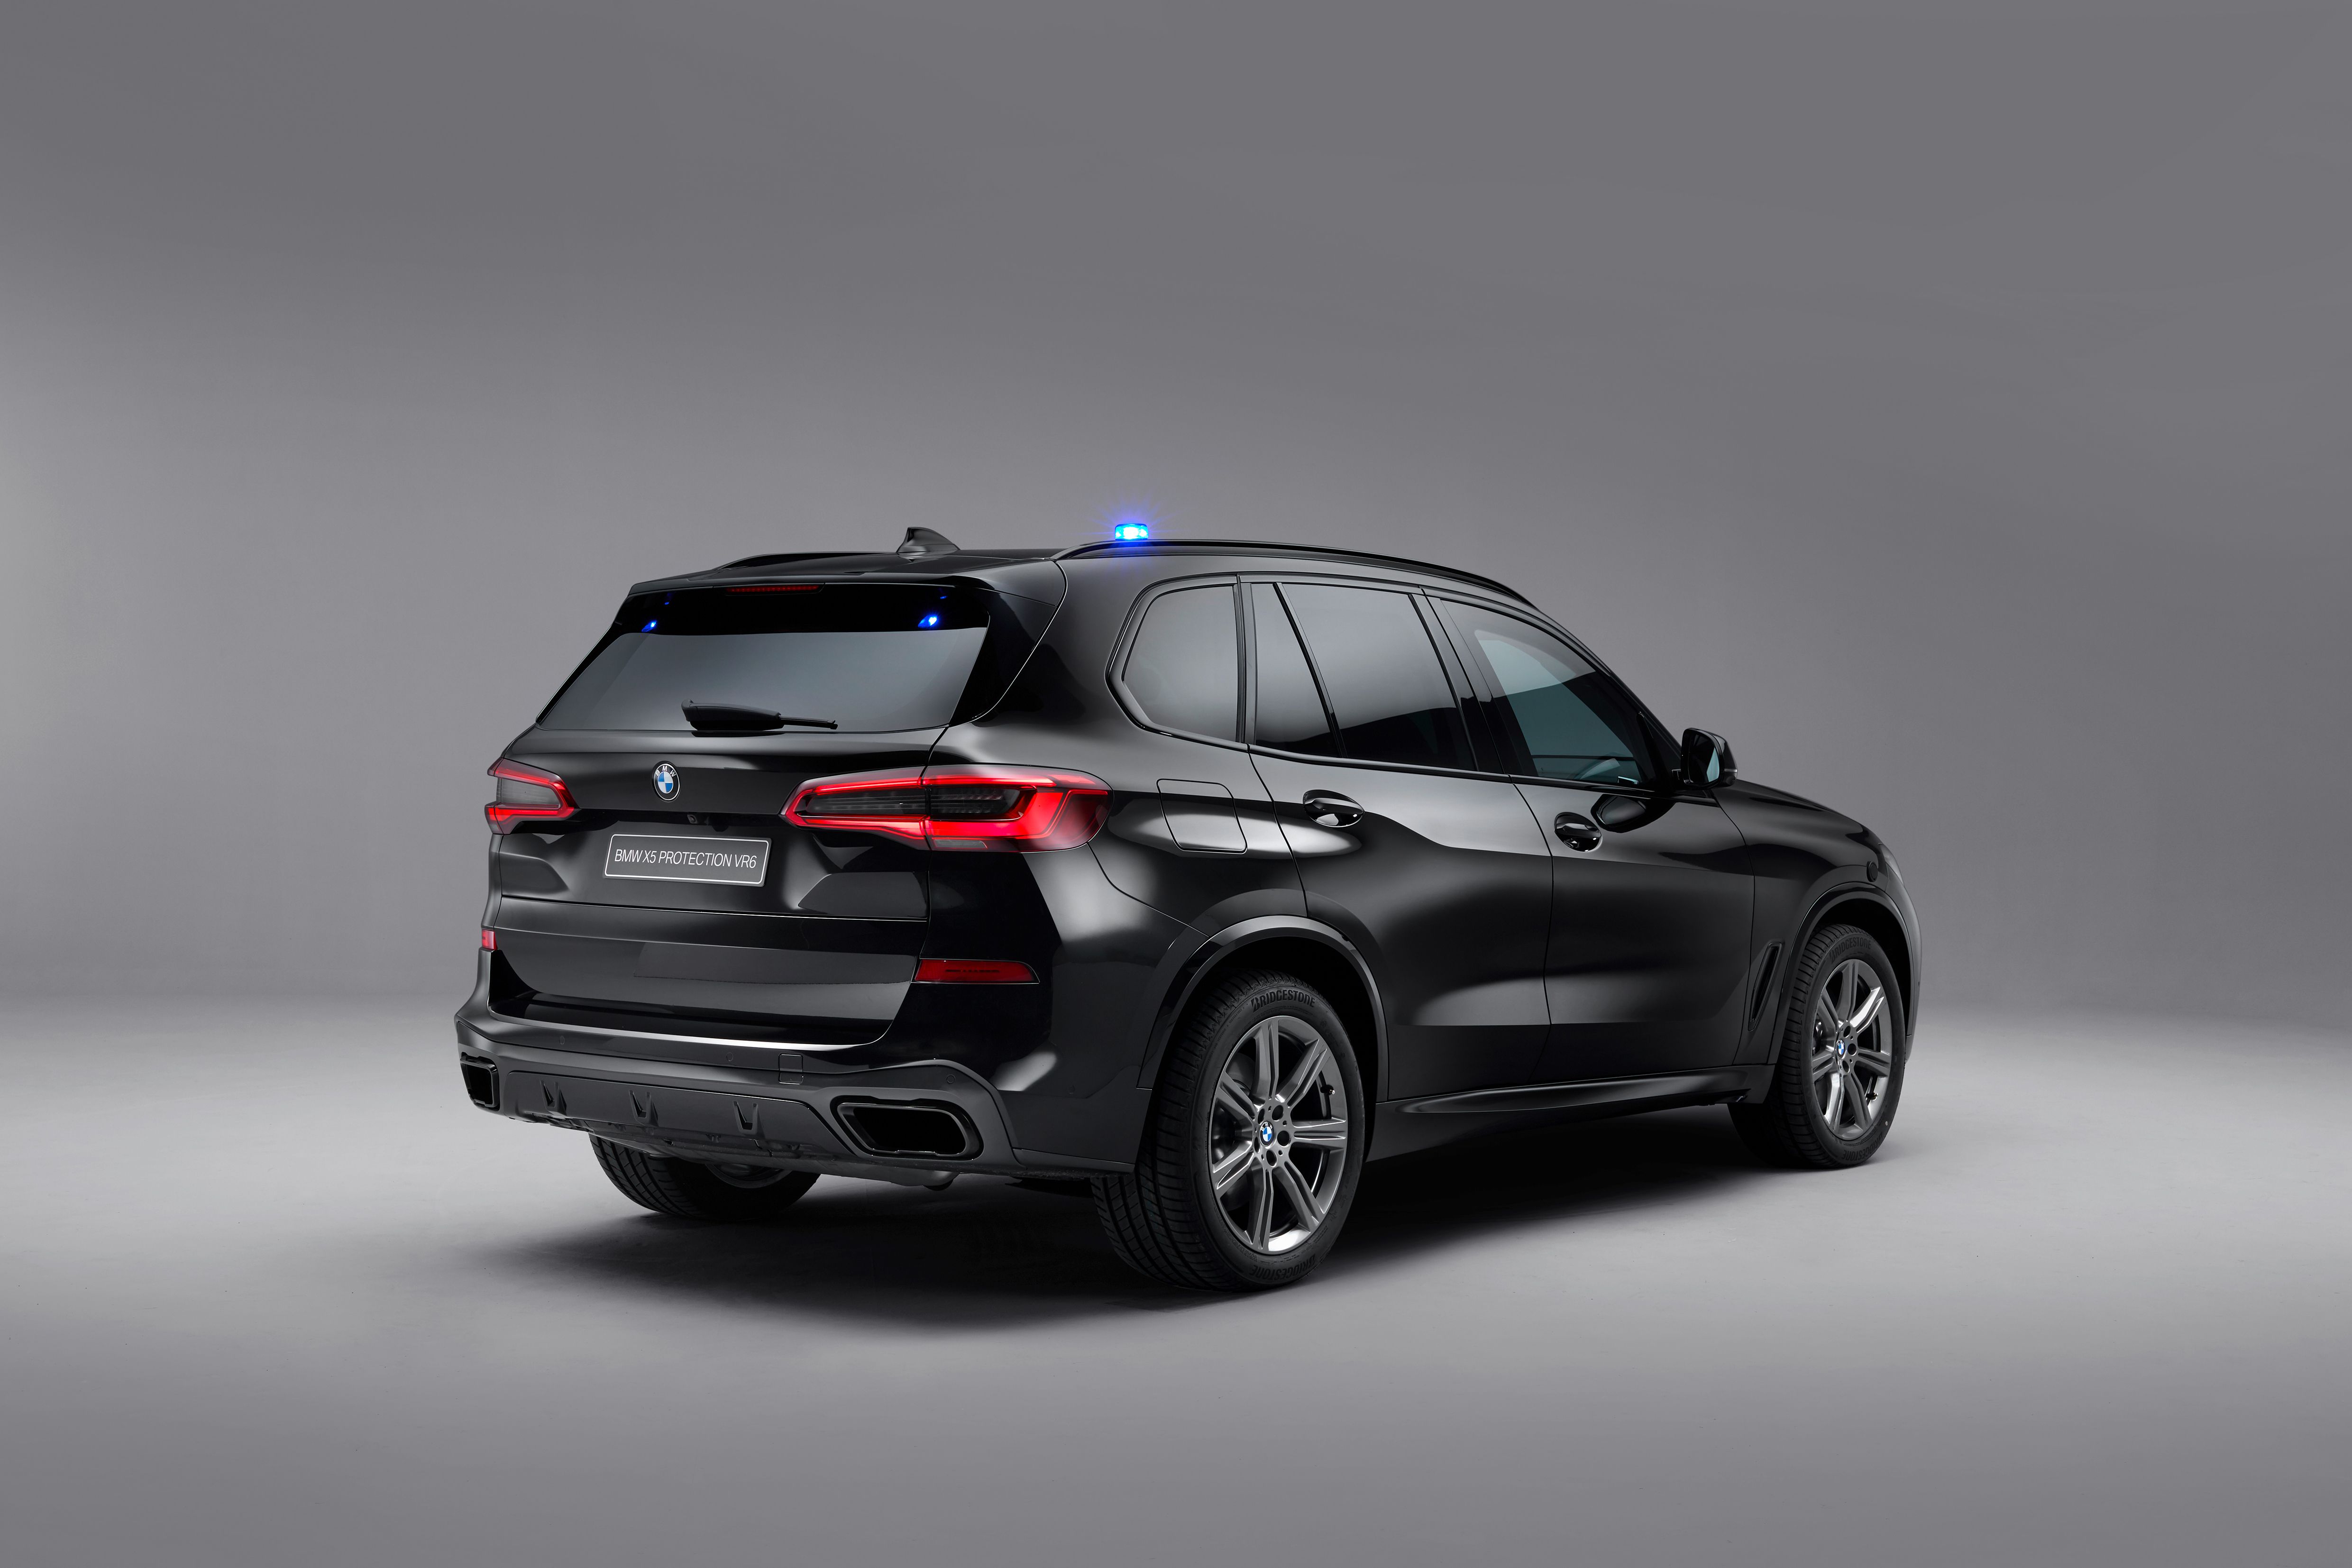 2019 BMW X5 Protection VR6